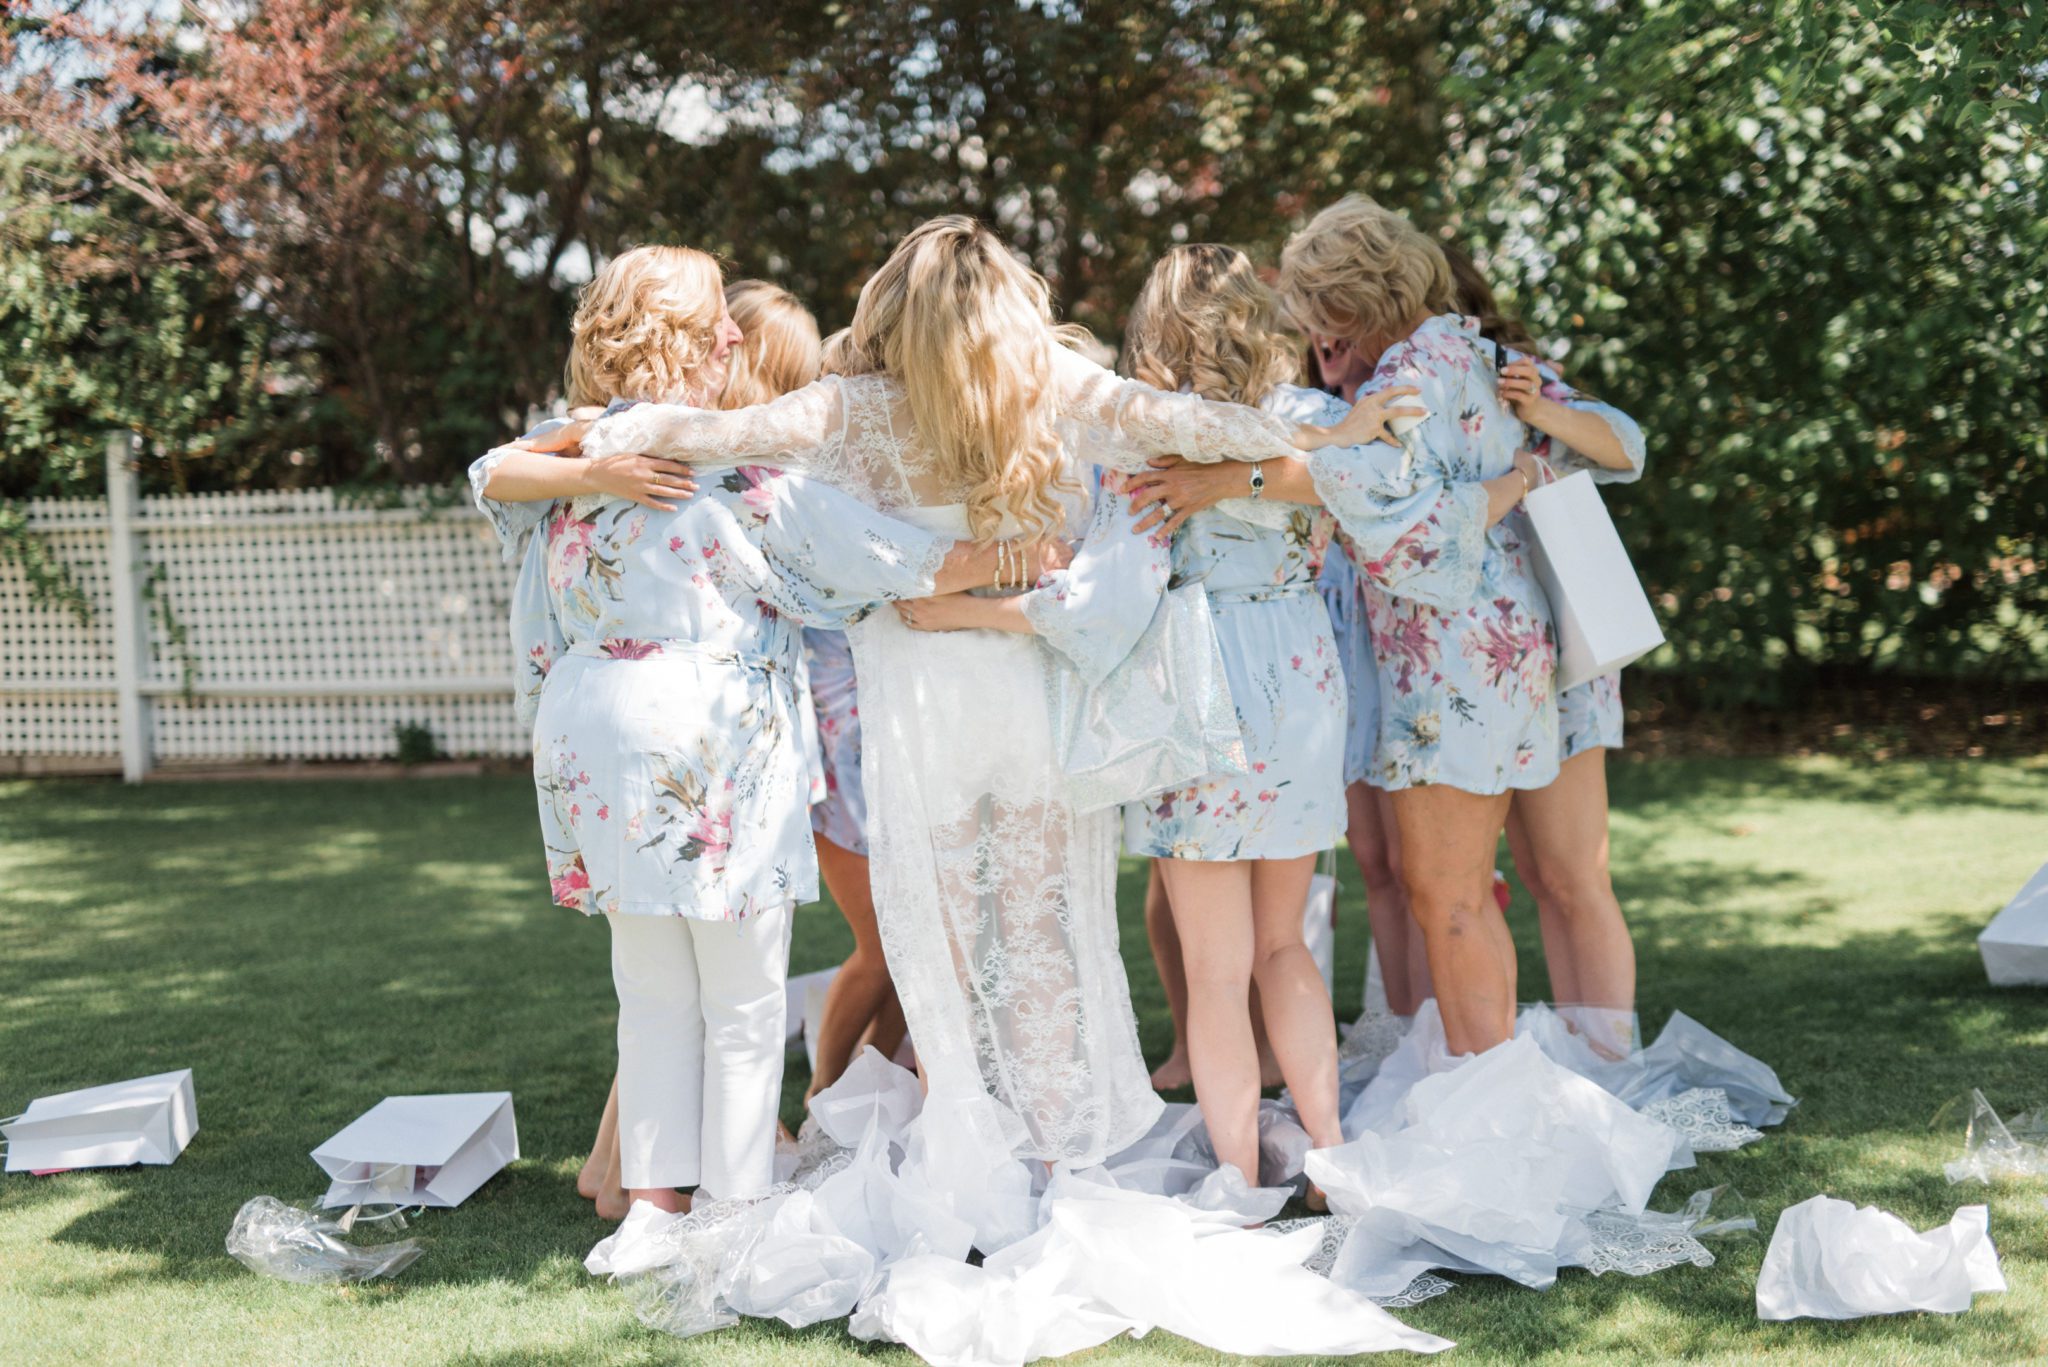 Pale blue and floral bridesmaid robes